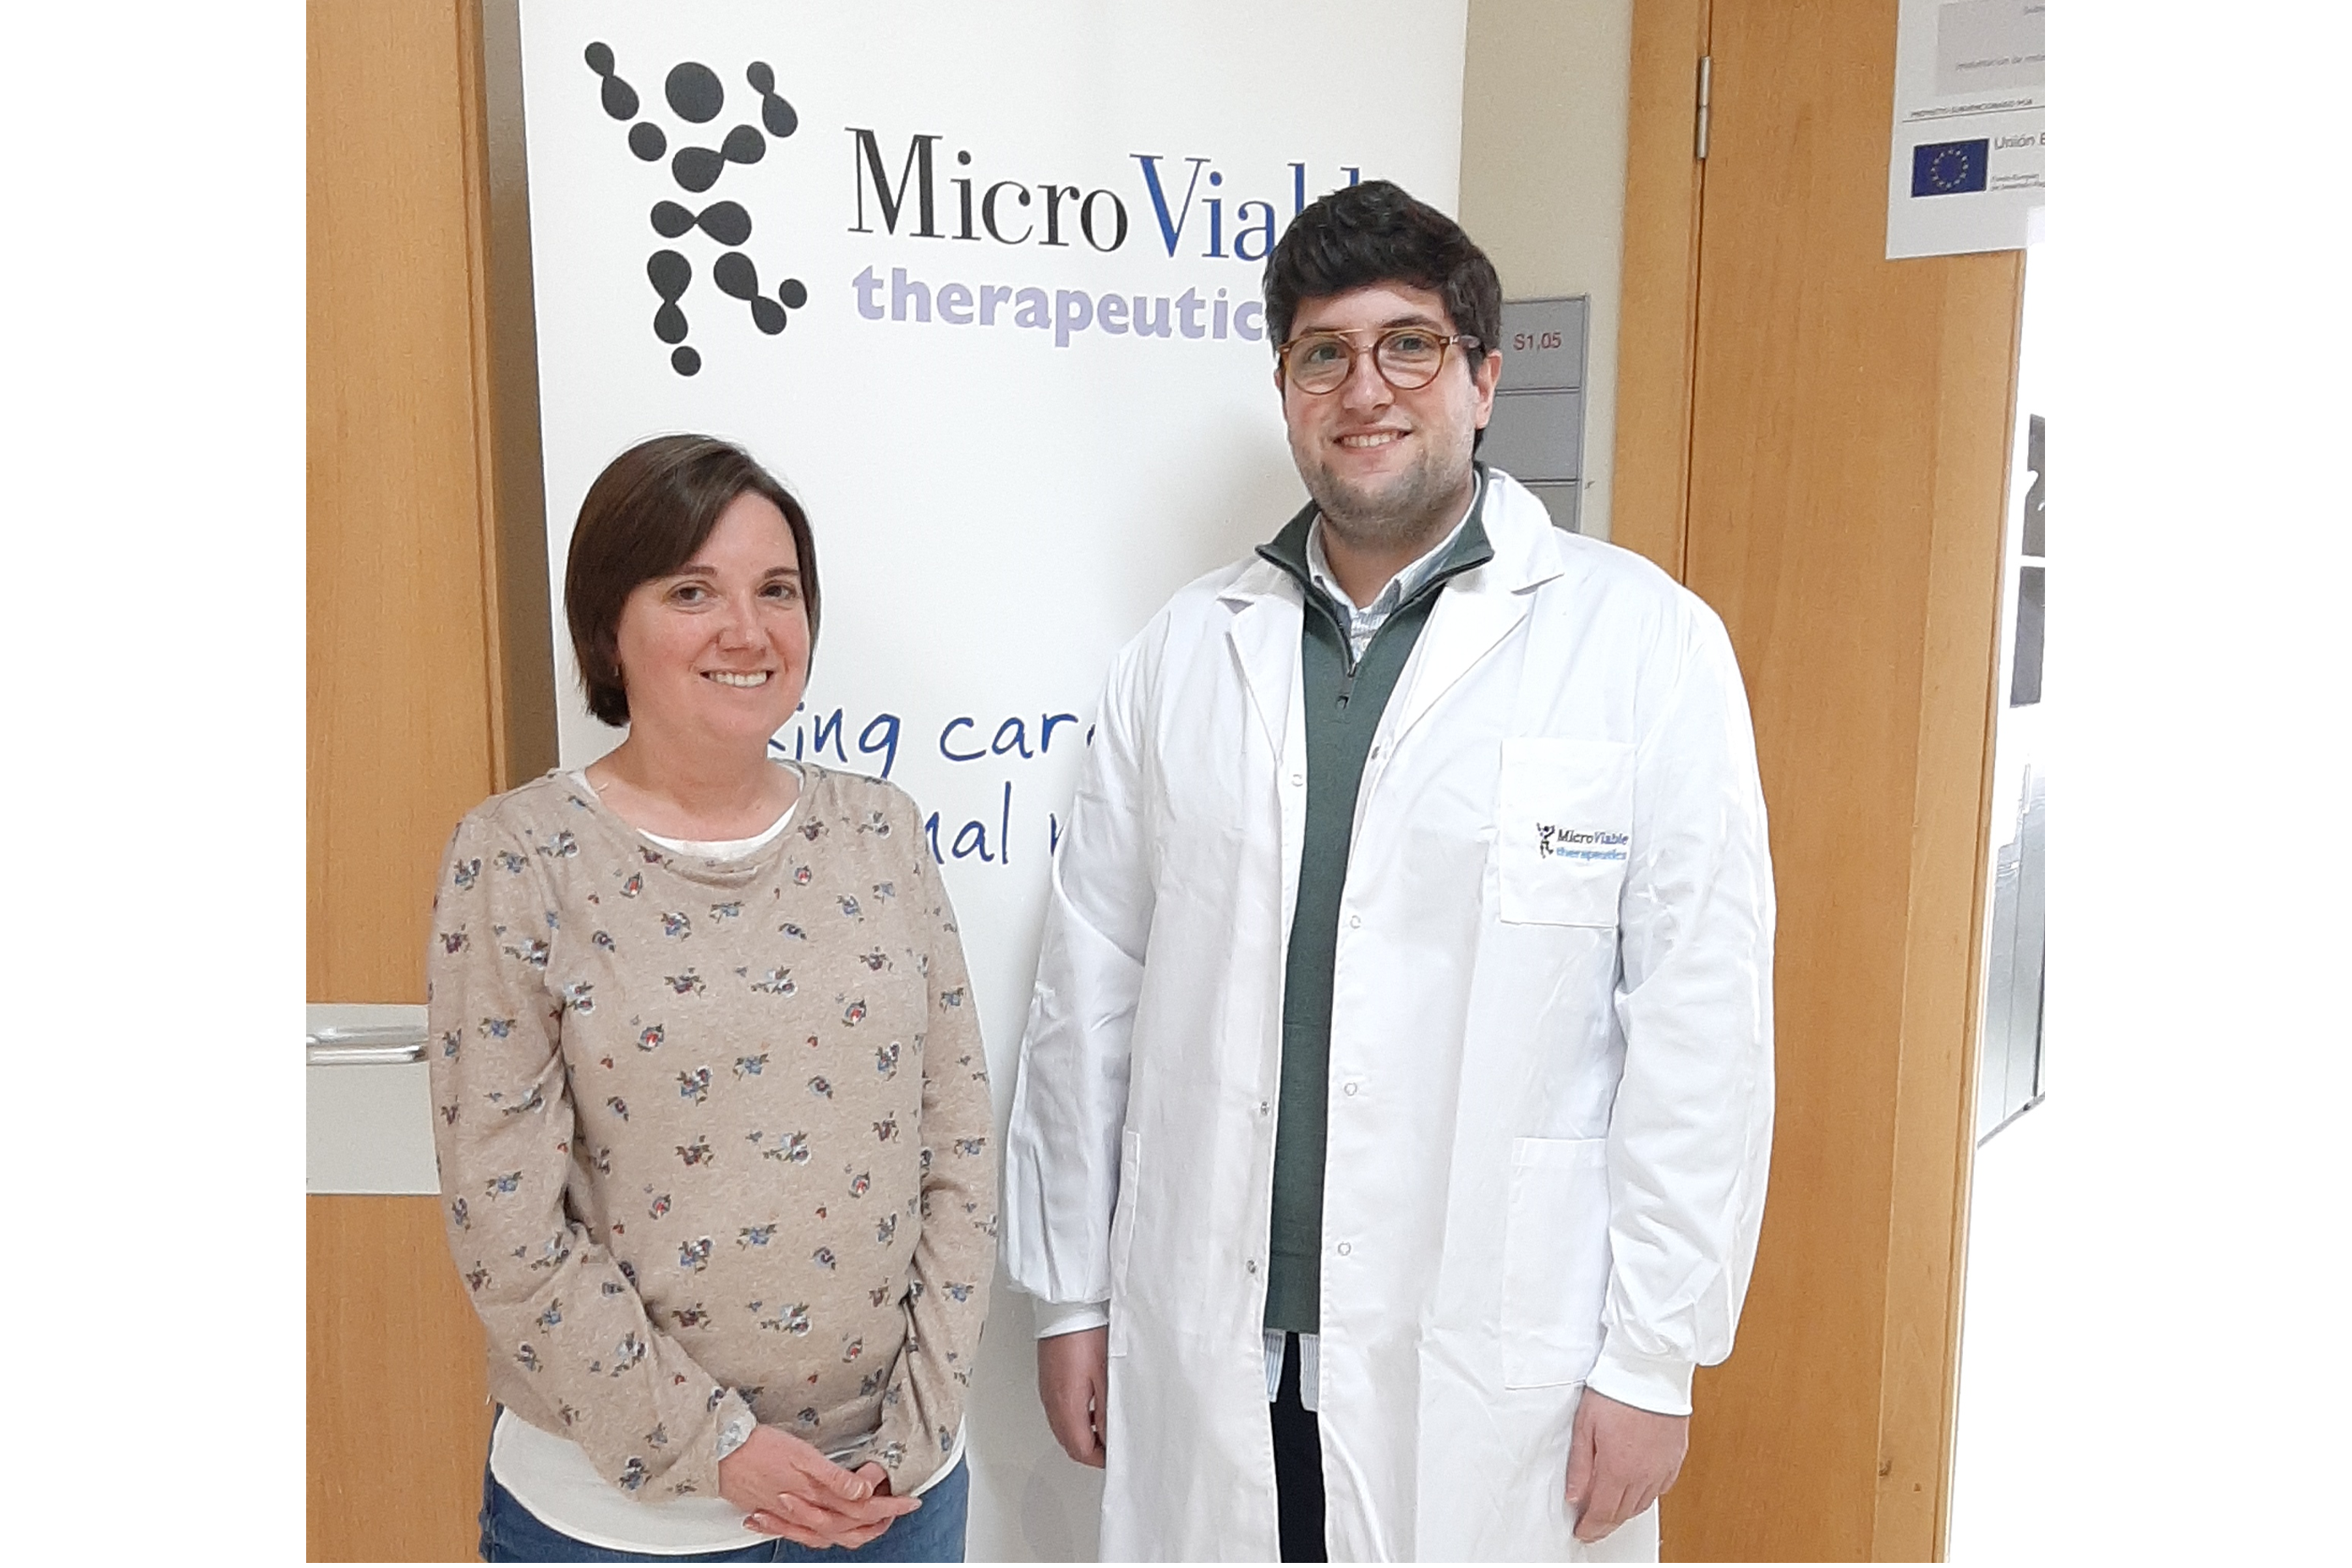 Microviable welcomes to the team the new internship student José González Poyo